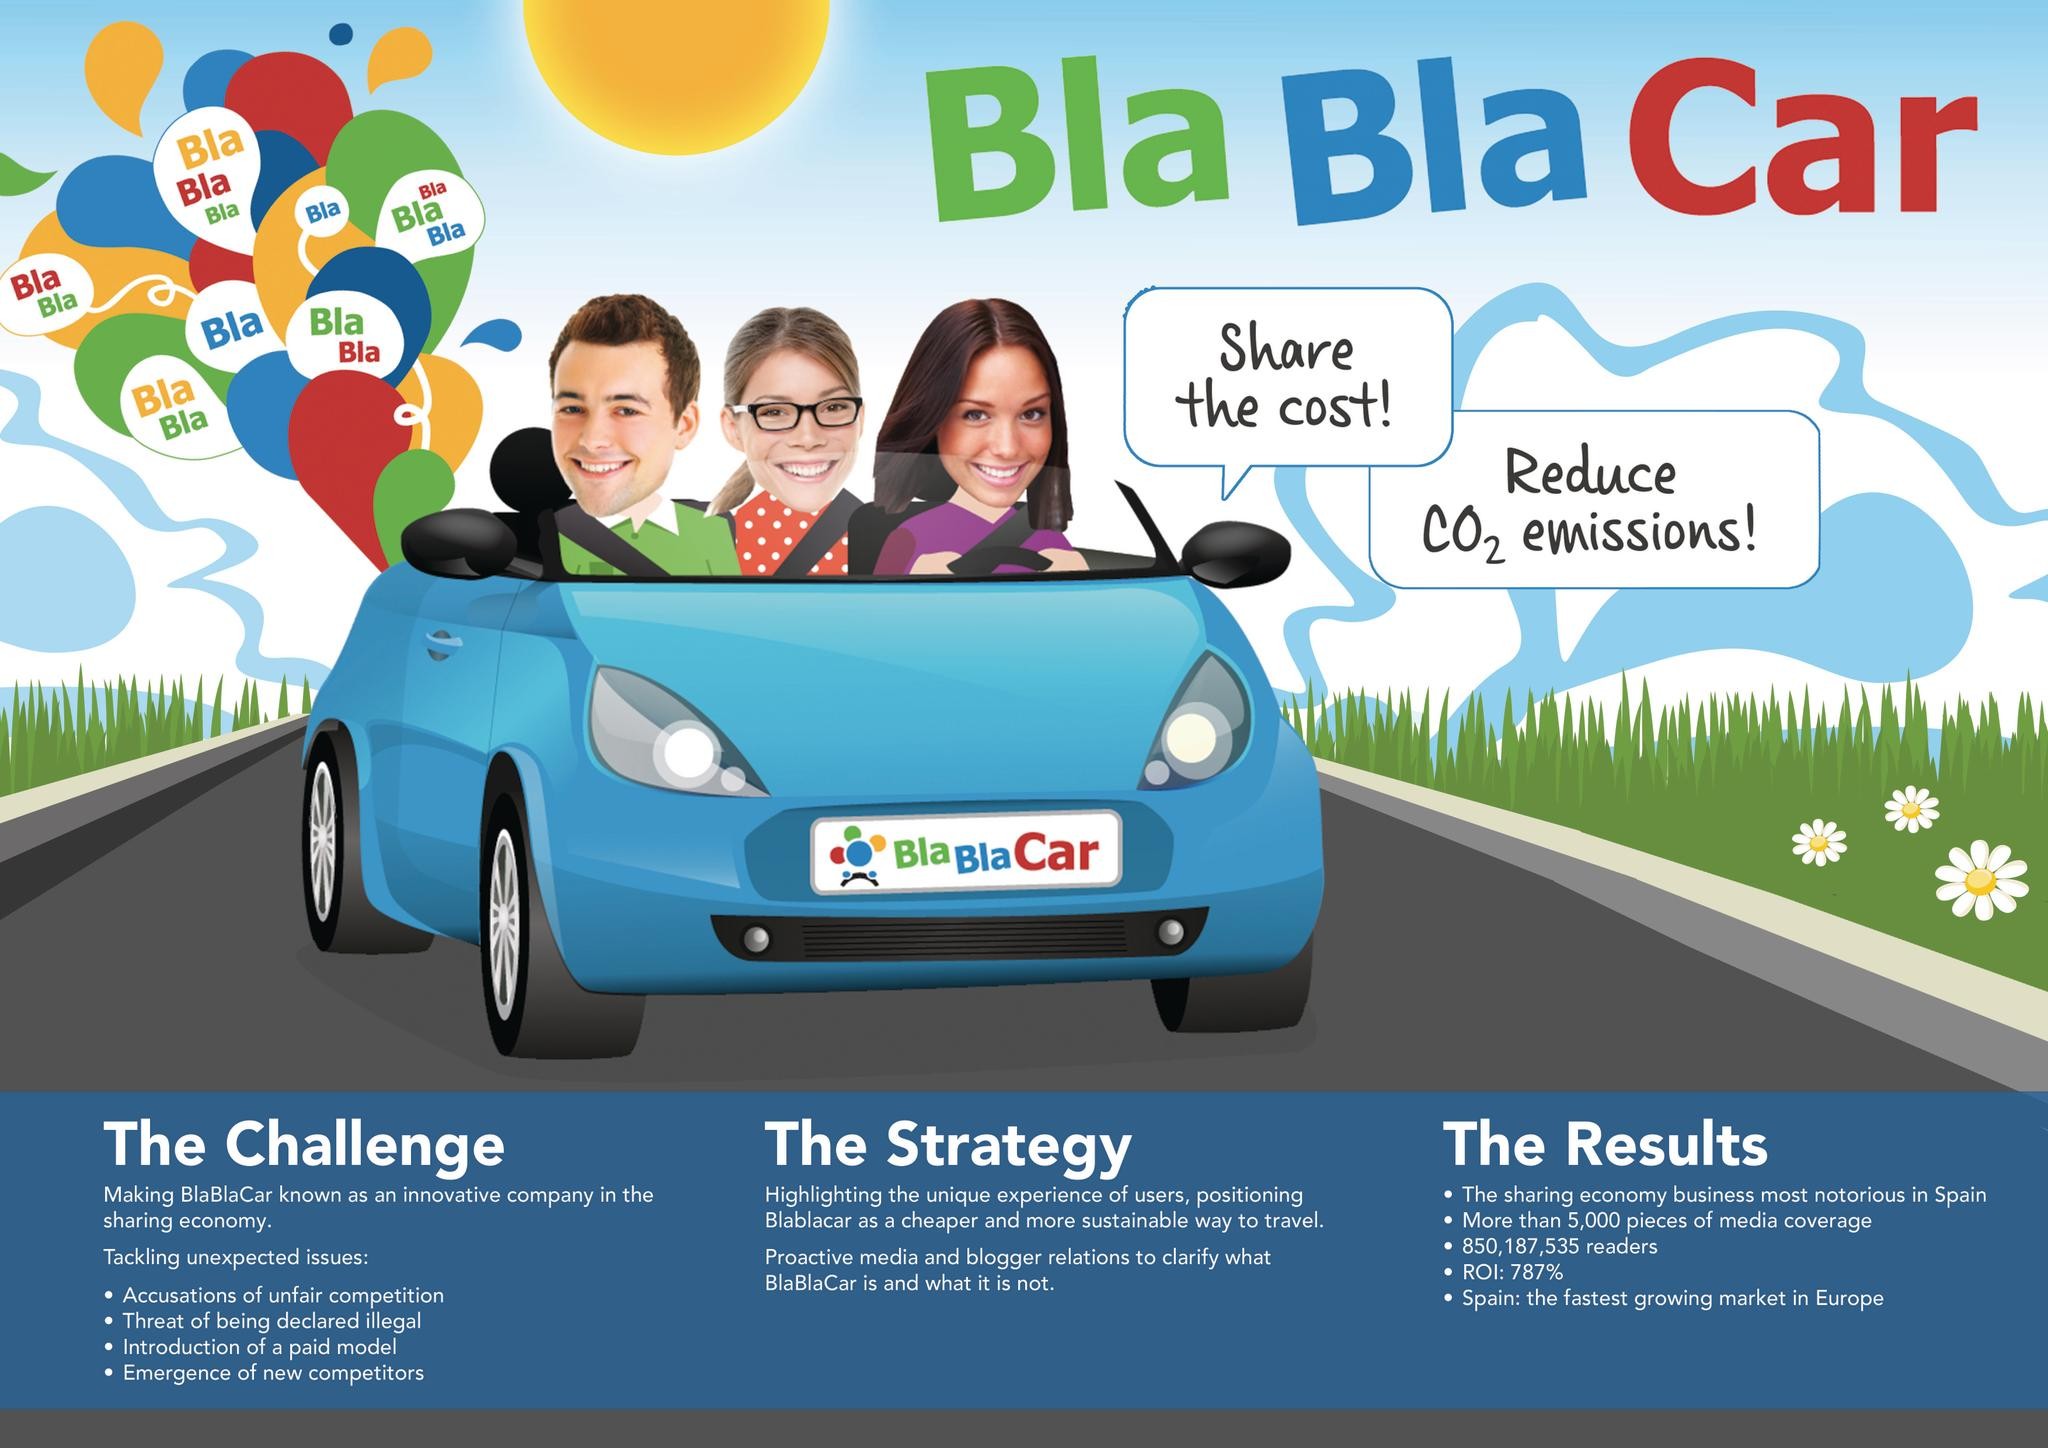 “TO DO A BLABLACAR”, FROM BRAND TO CONCEPT